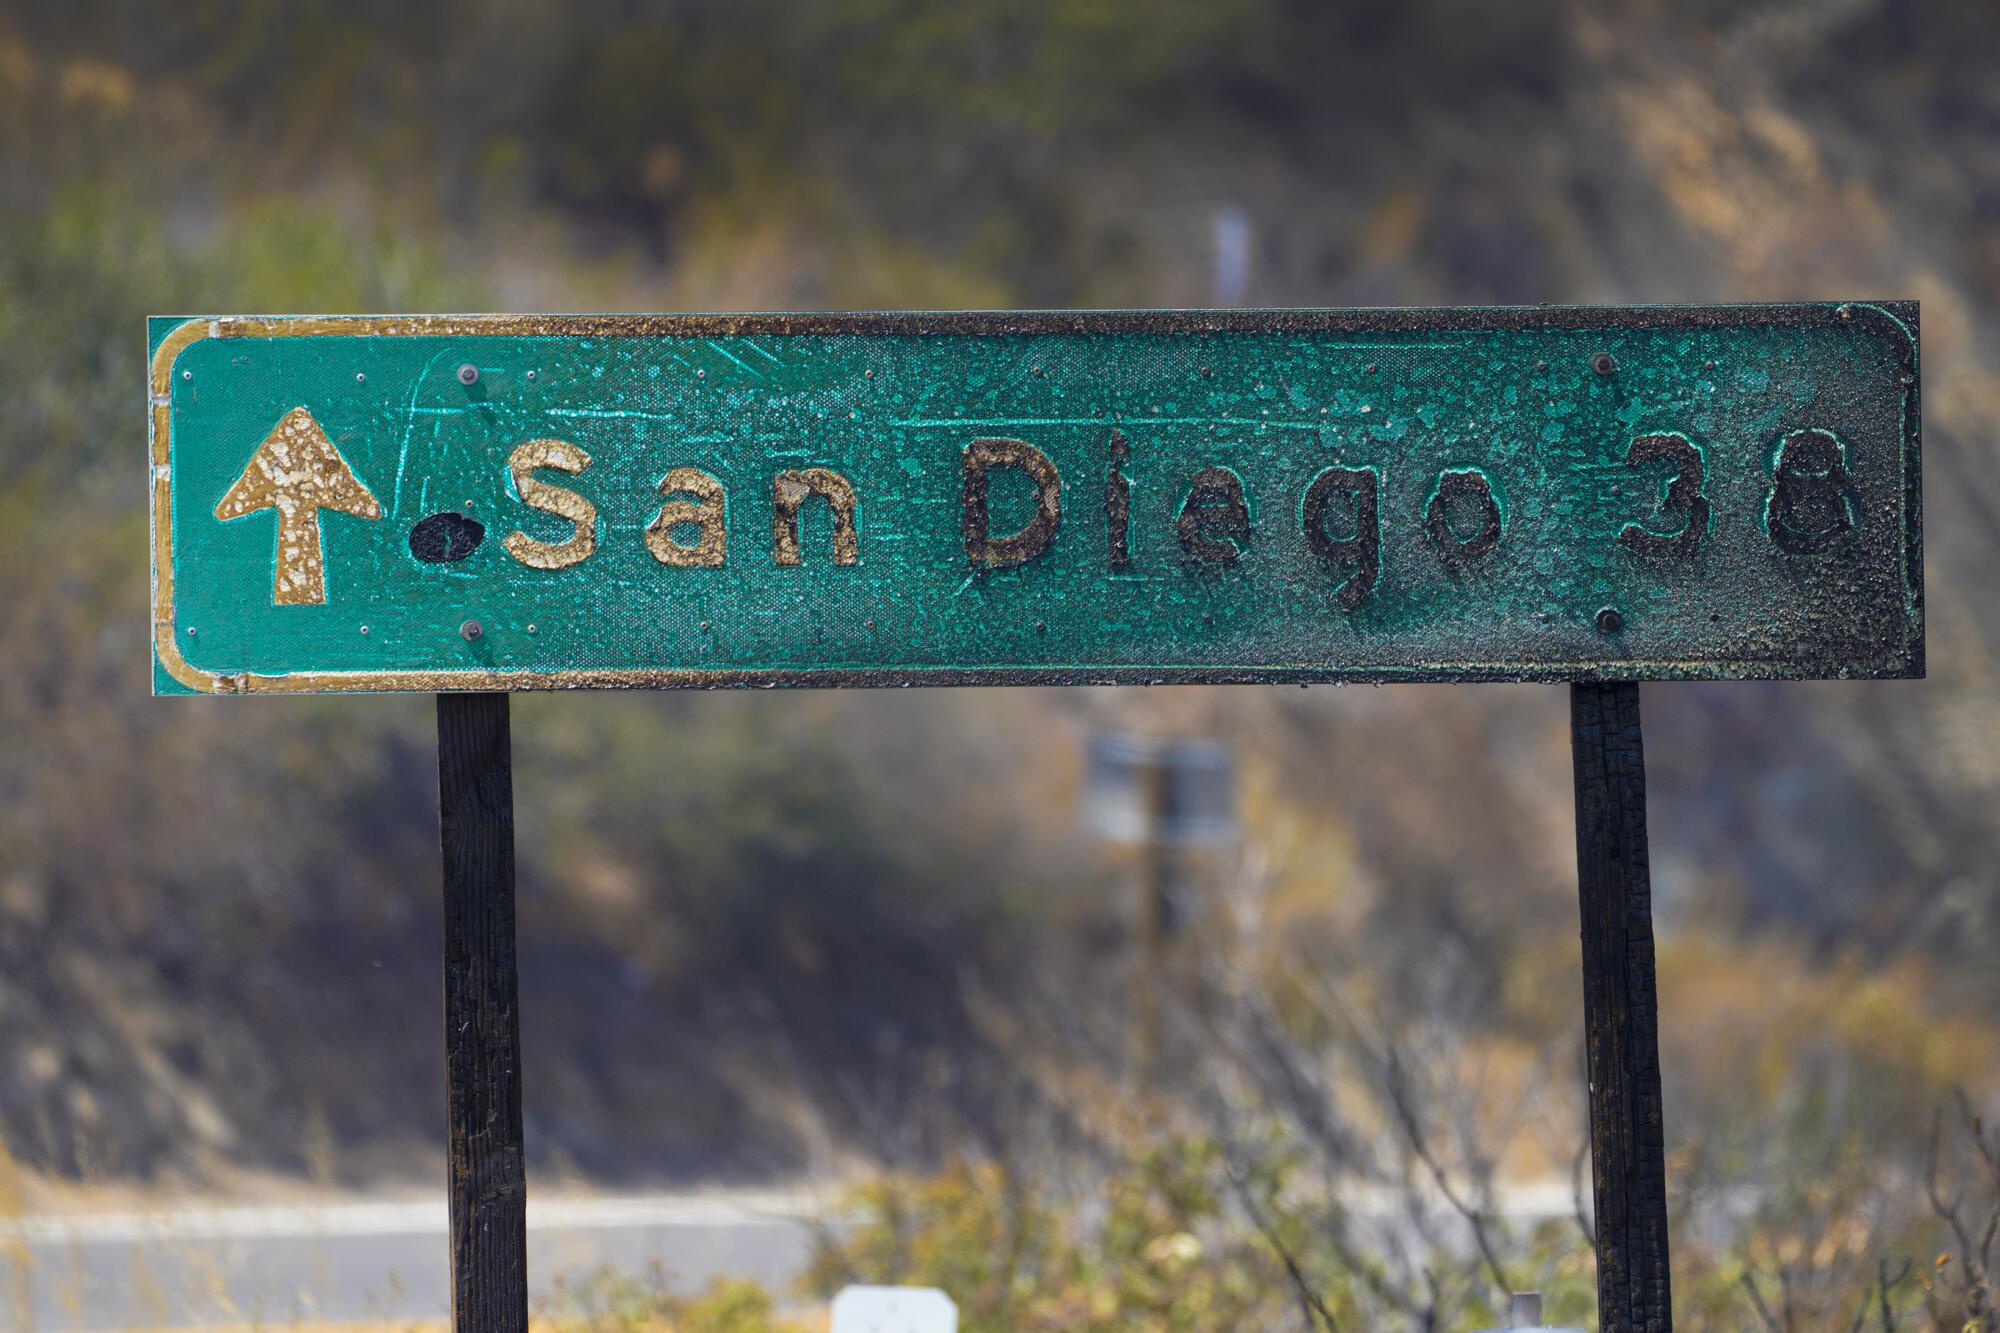 A blackened road sign reads "San Diego: 38" with an arrow.